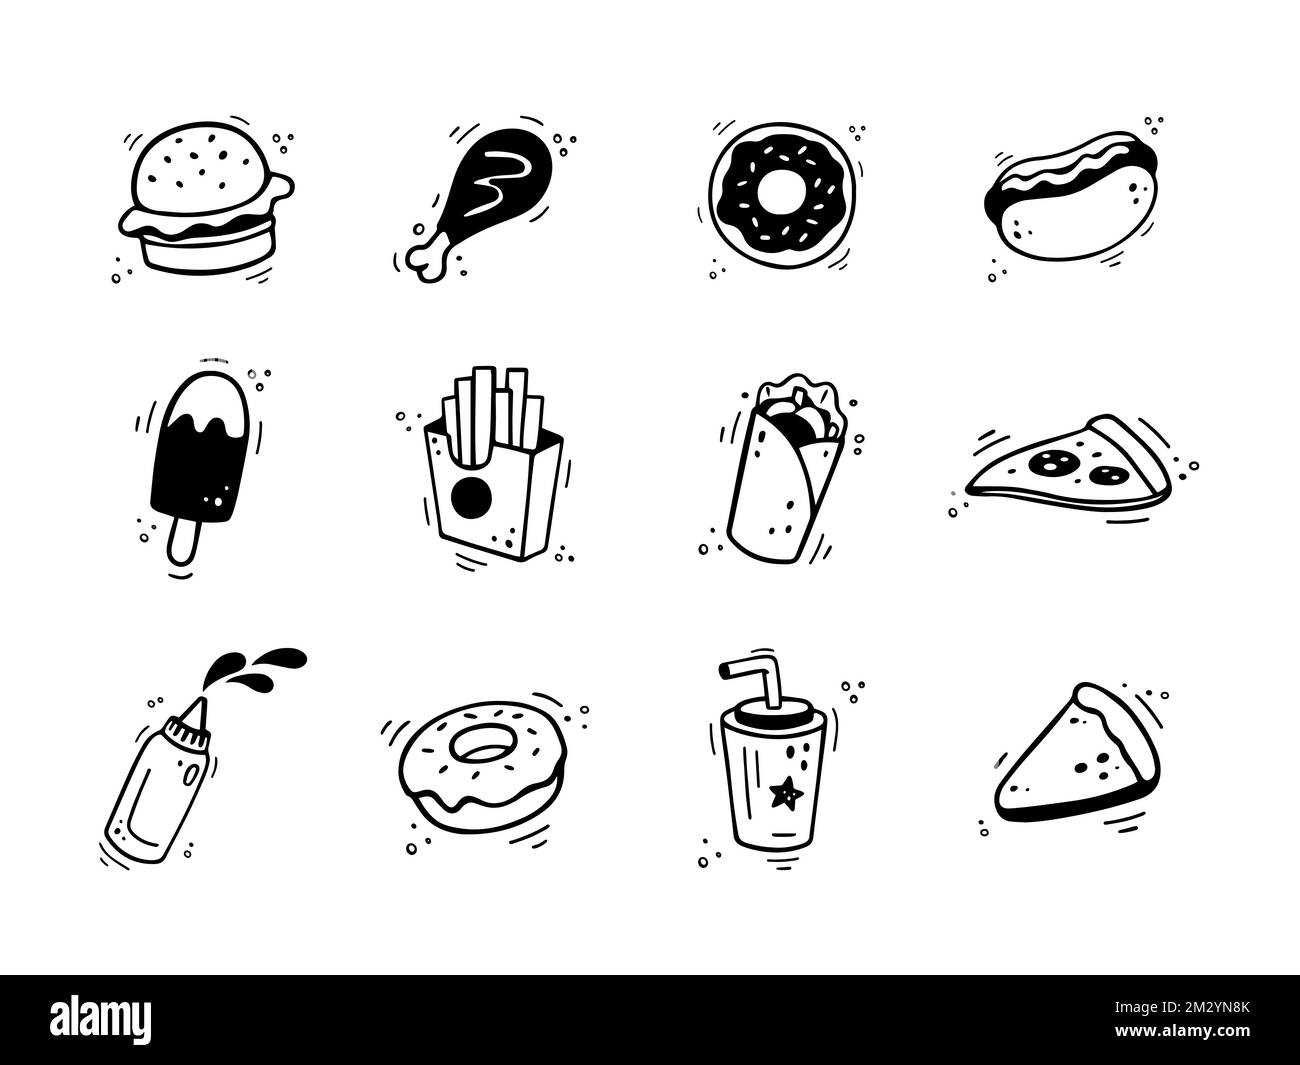 Hand drawn fast food icons. Sketch of snack elements. Fast food illustration in doodle style. Fast food collection. Stock Vector